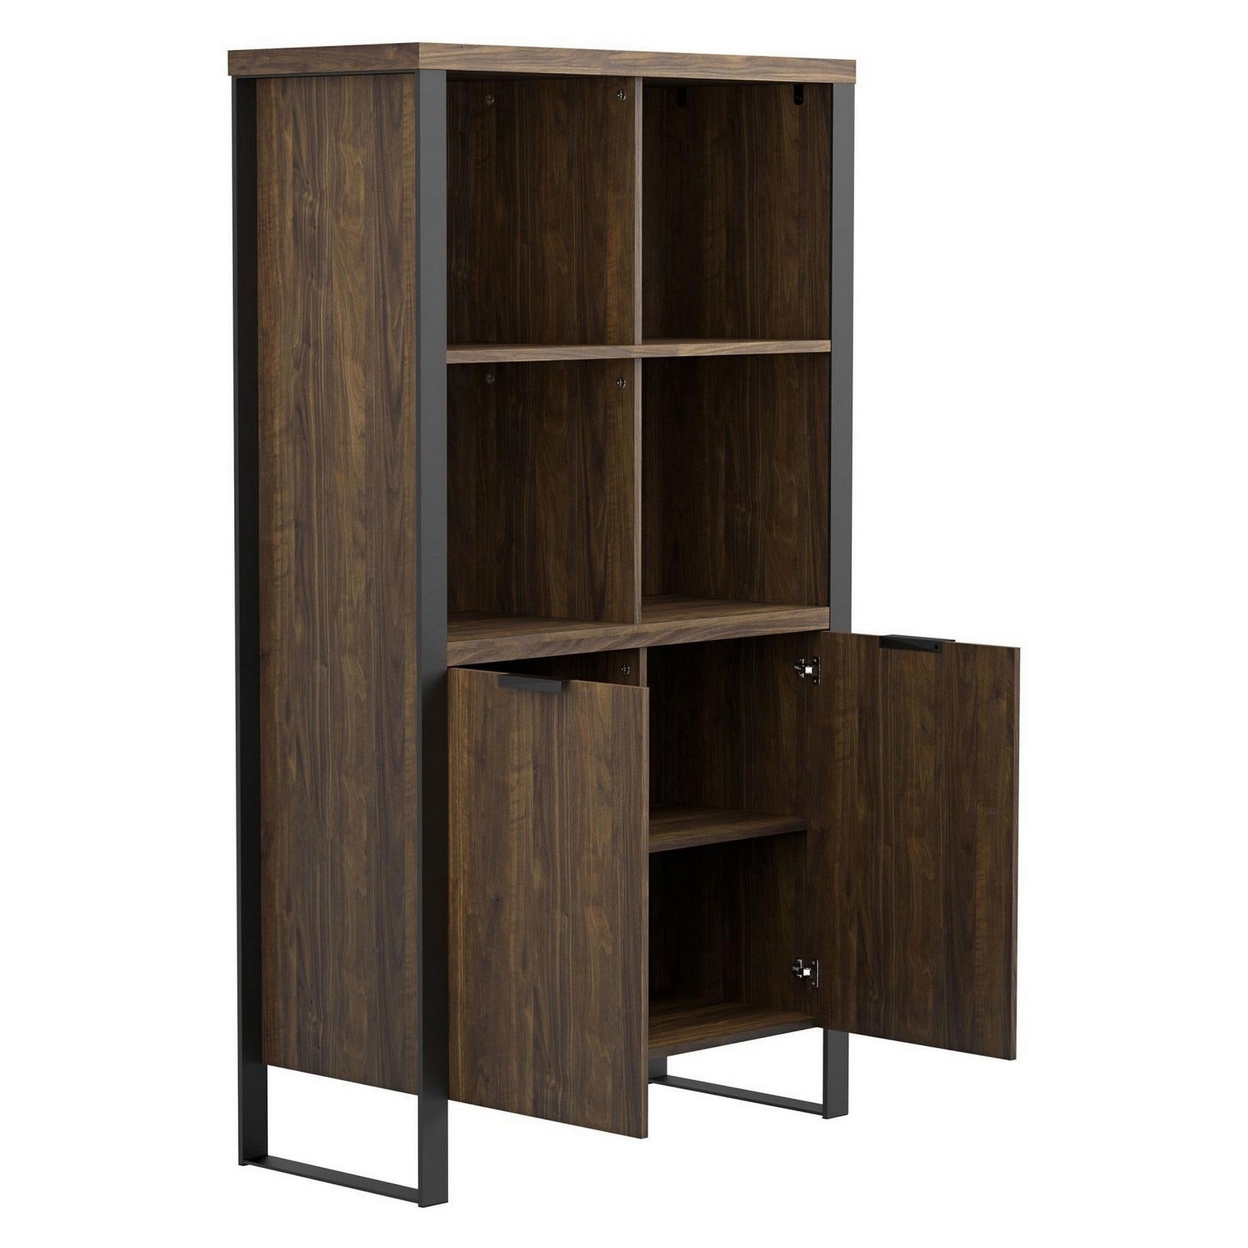 Wooden Bookcase With 2 Doors And Metal Frame, Brown And Black- Saltoro Sherpi